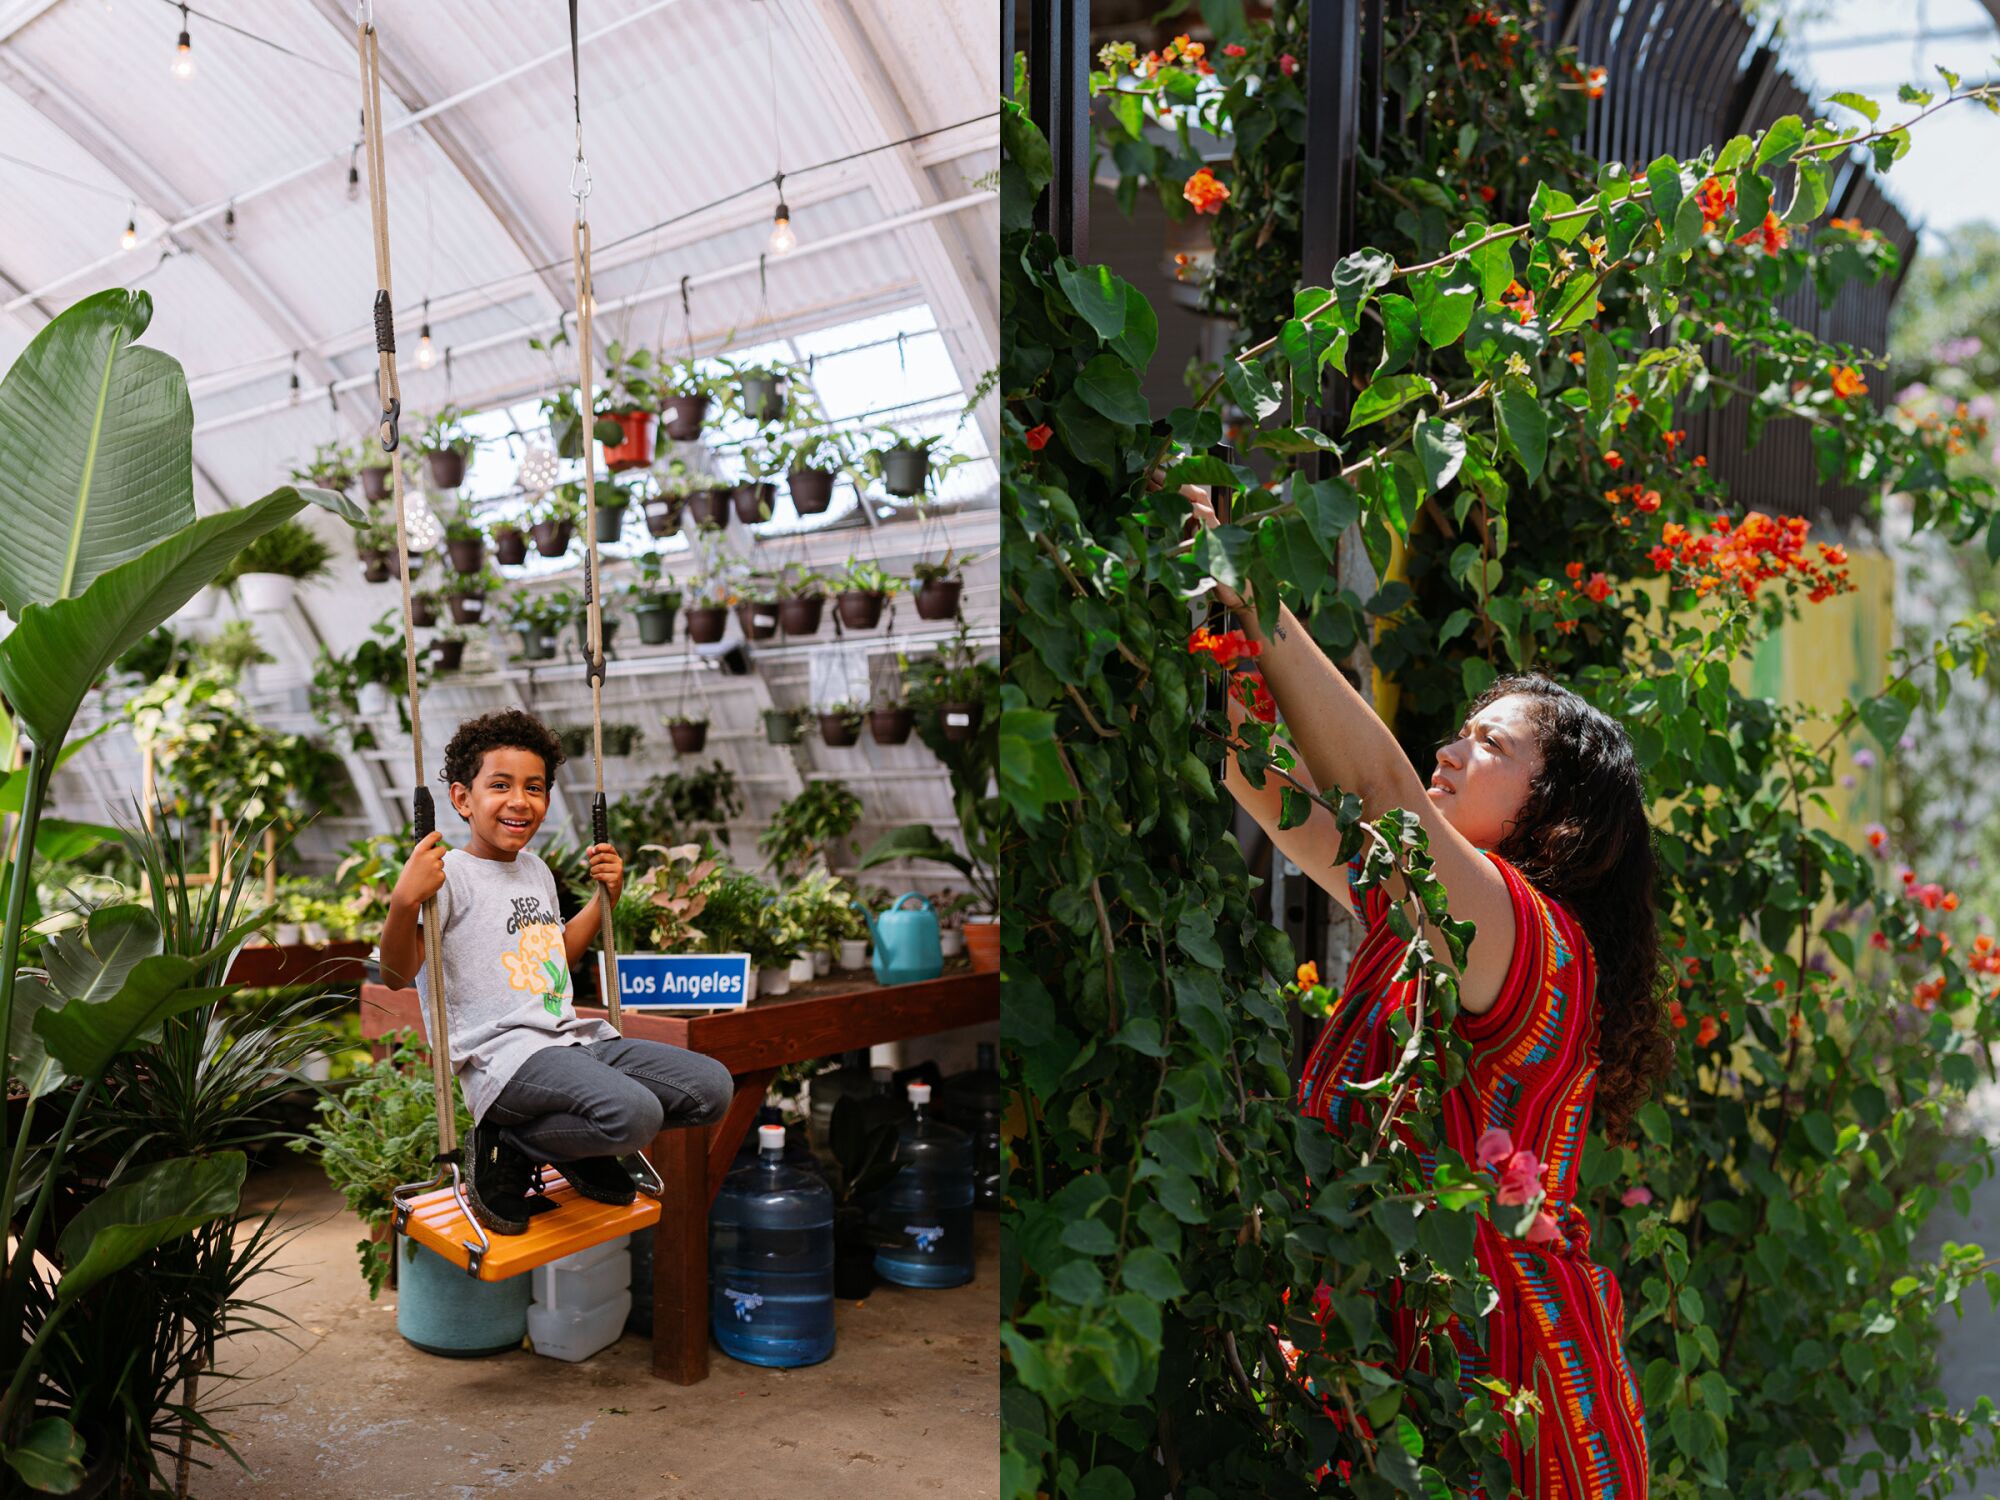 Alem Adis on a swing inside Plant Chica, left, and his mother, Sandra Mejia, rearranges flowers on a vine, right.